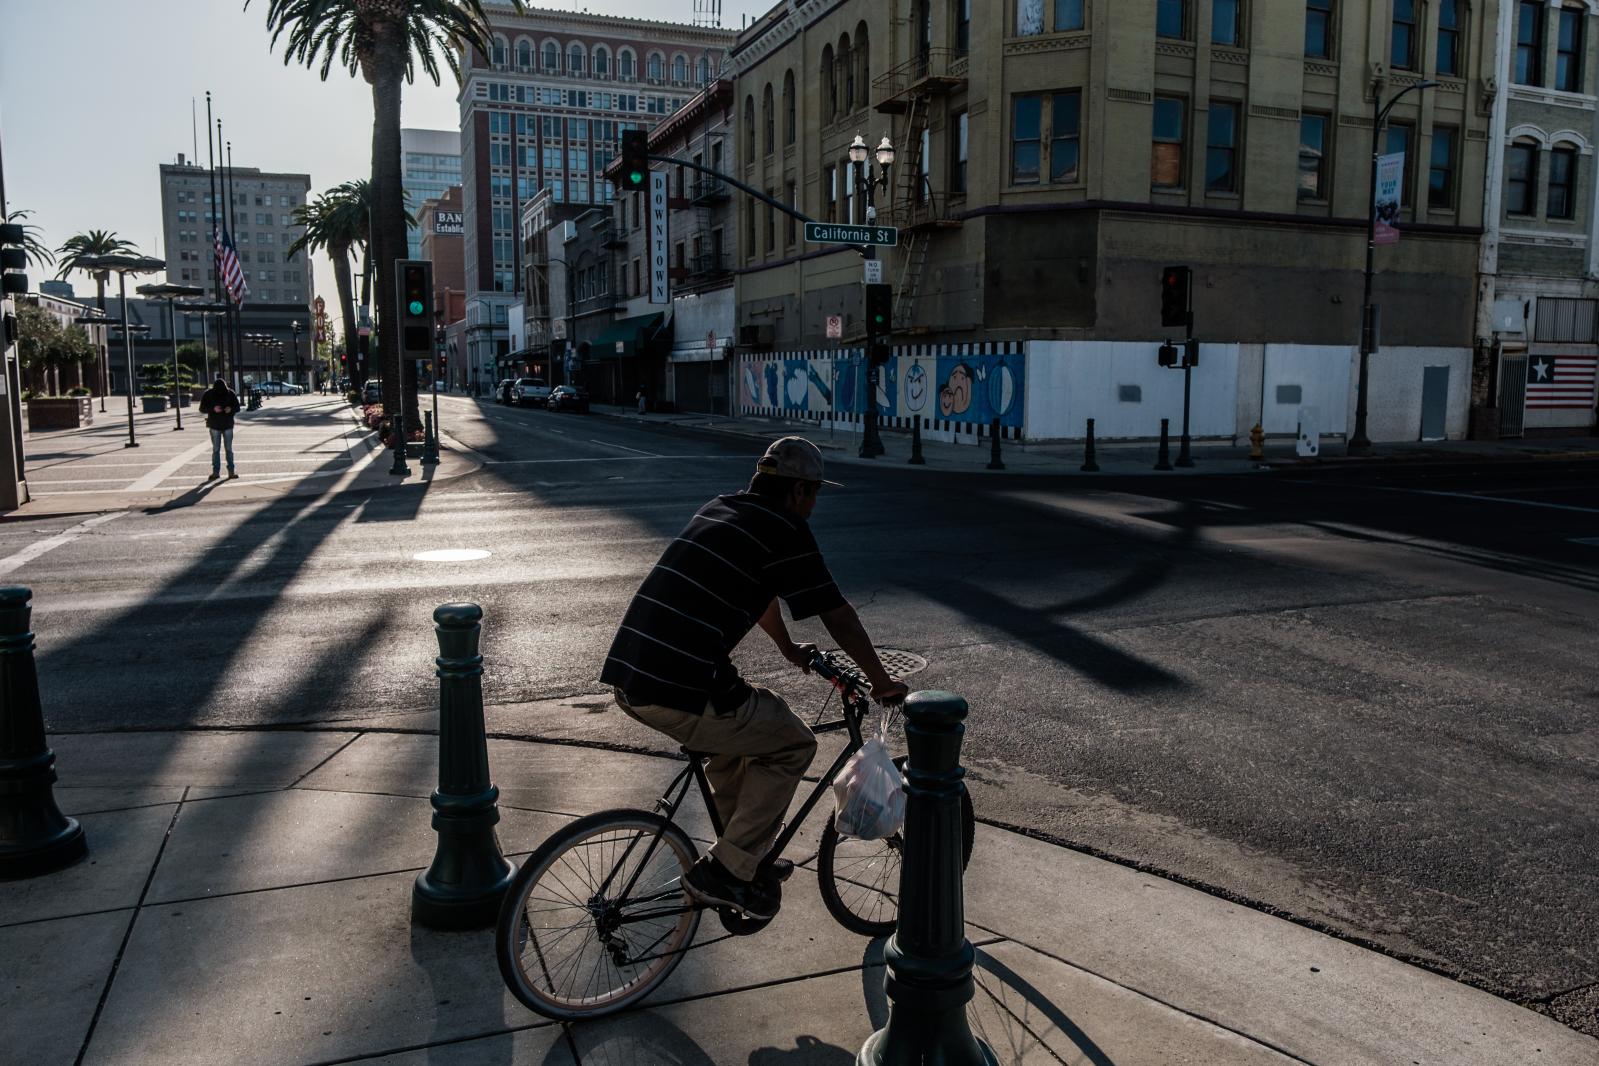 Image from Universal Basic Income: Trying to save a city - STOCKTON, CA - APRIL 5: A bicyclist is seen riding...